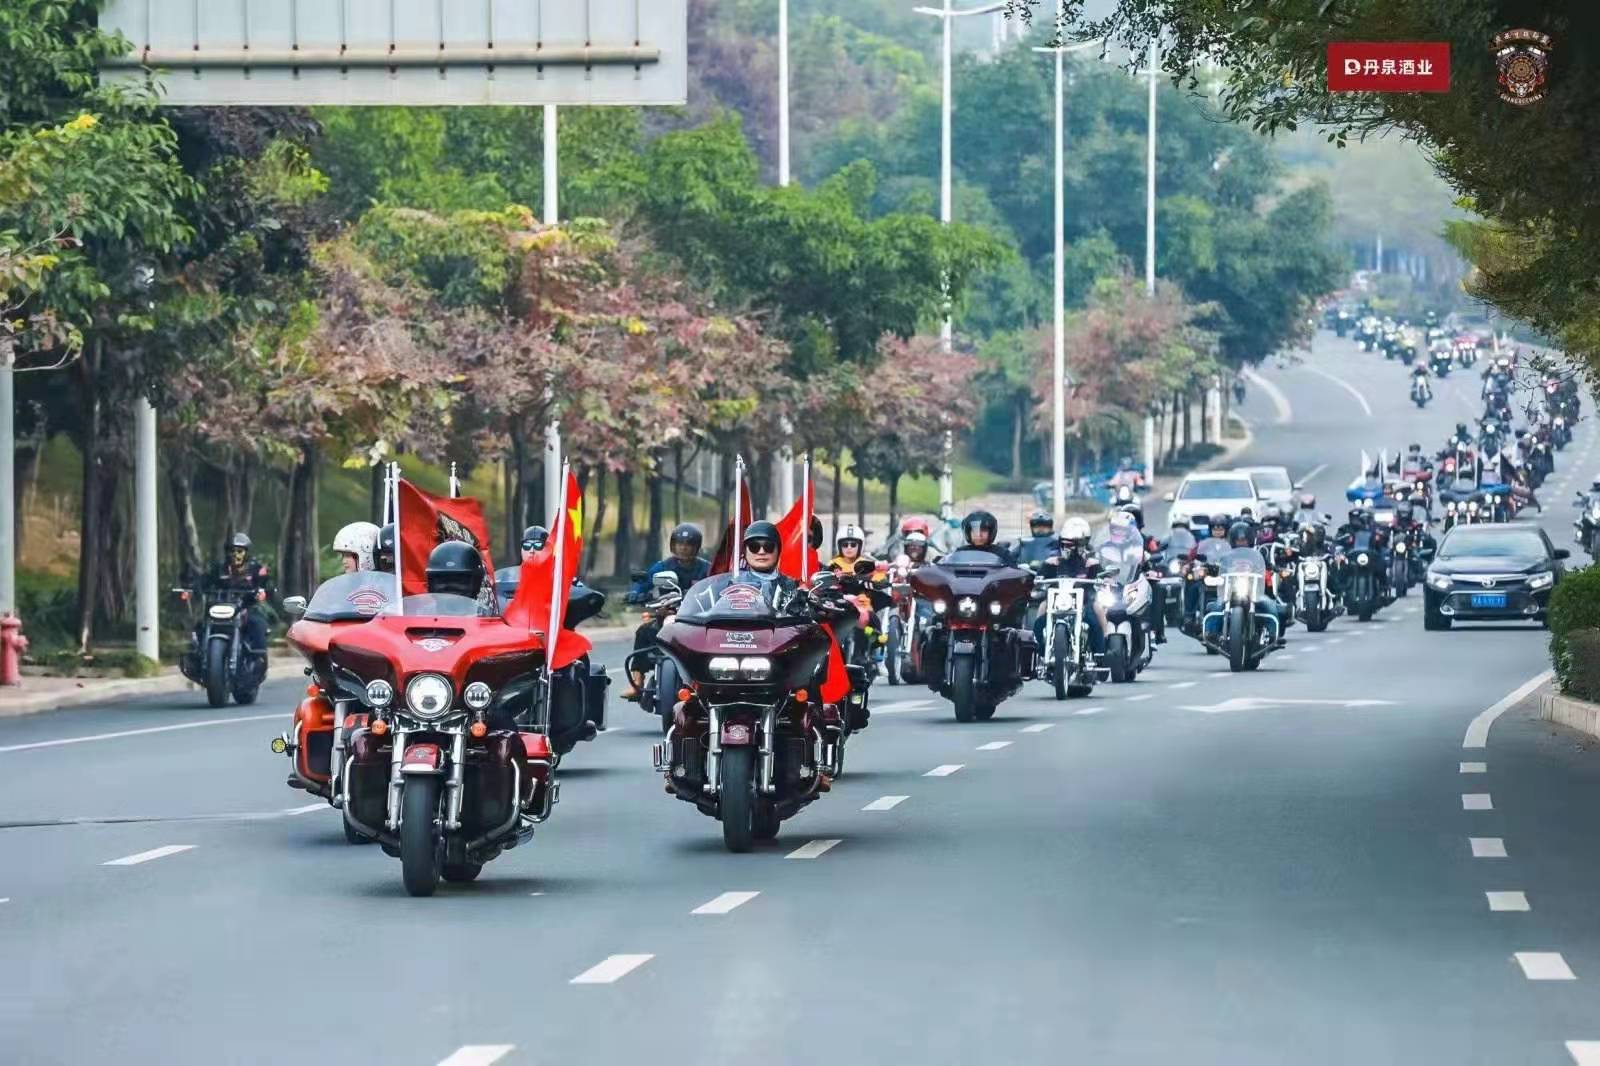 The Roaring Unity: Decoding the Spectacle of Giant Motorcycle Group Rides